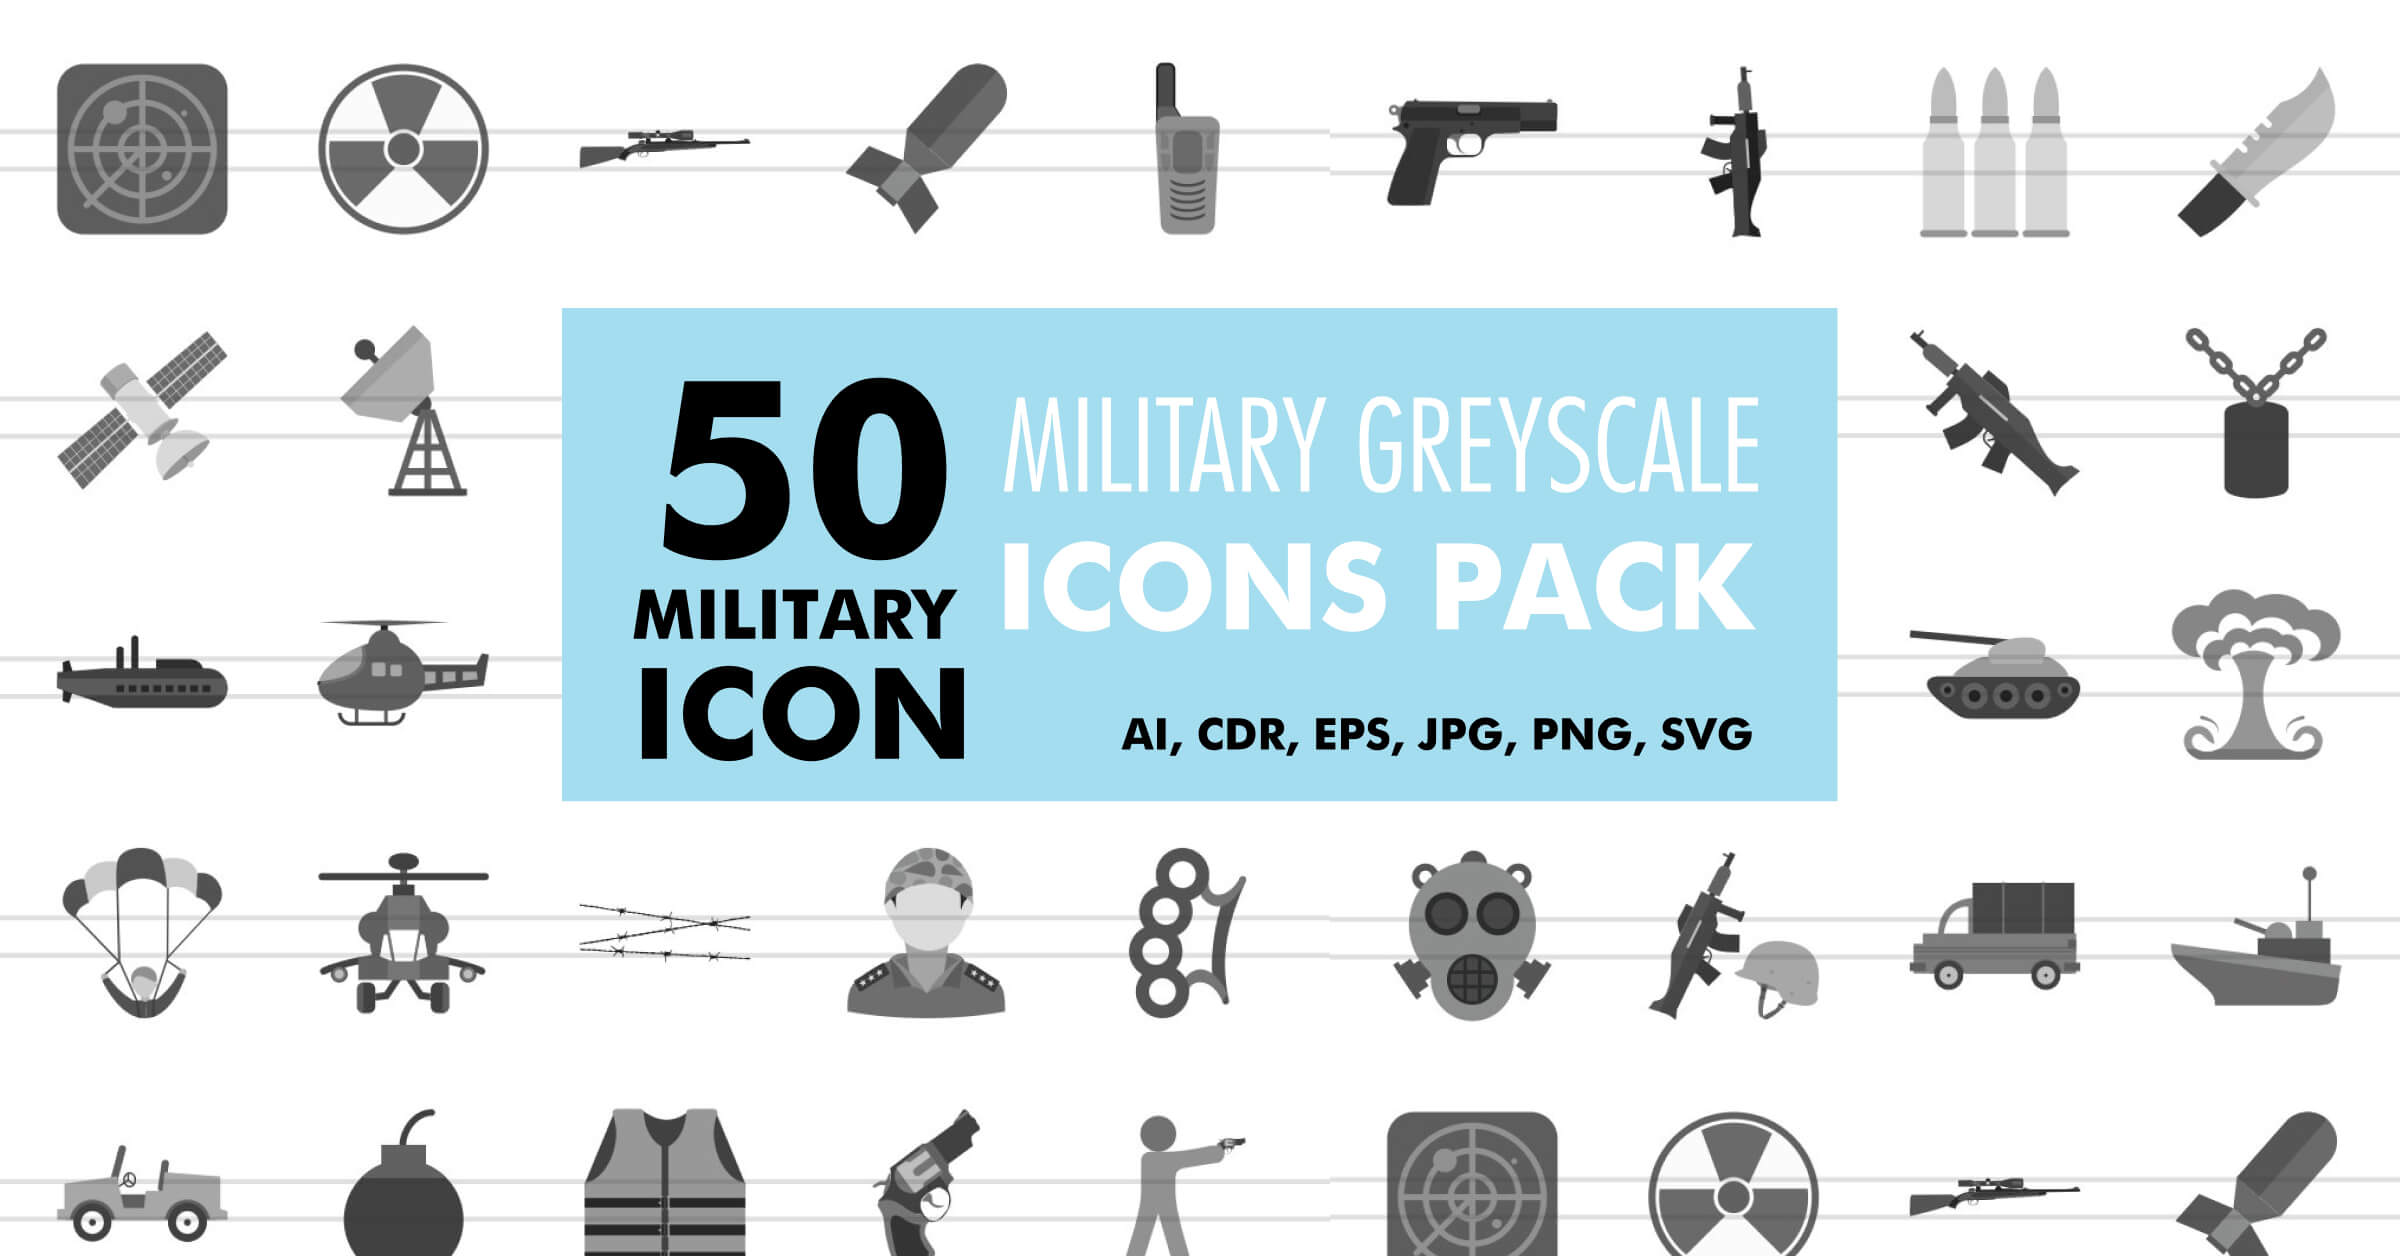 Small icons of military aircraft, ground forces, etc. on a white background.